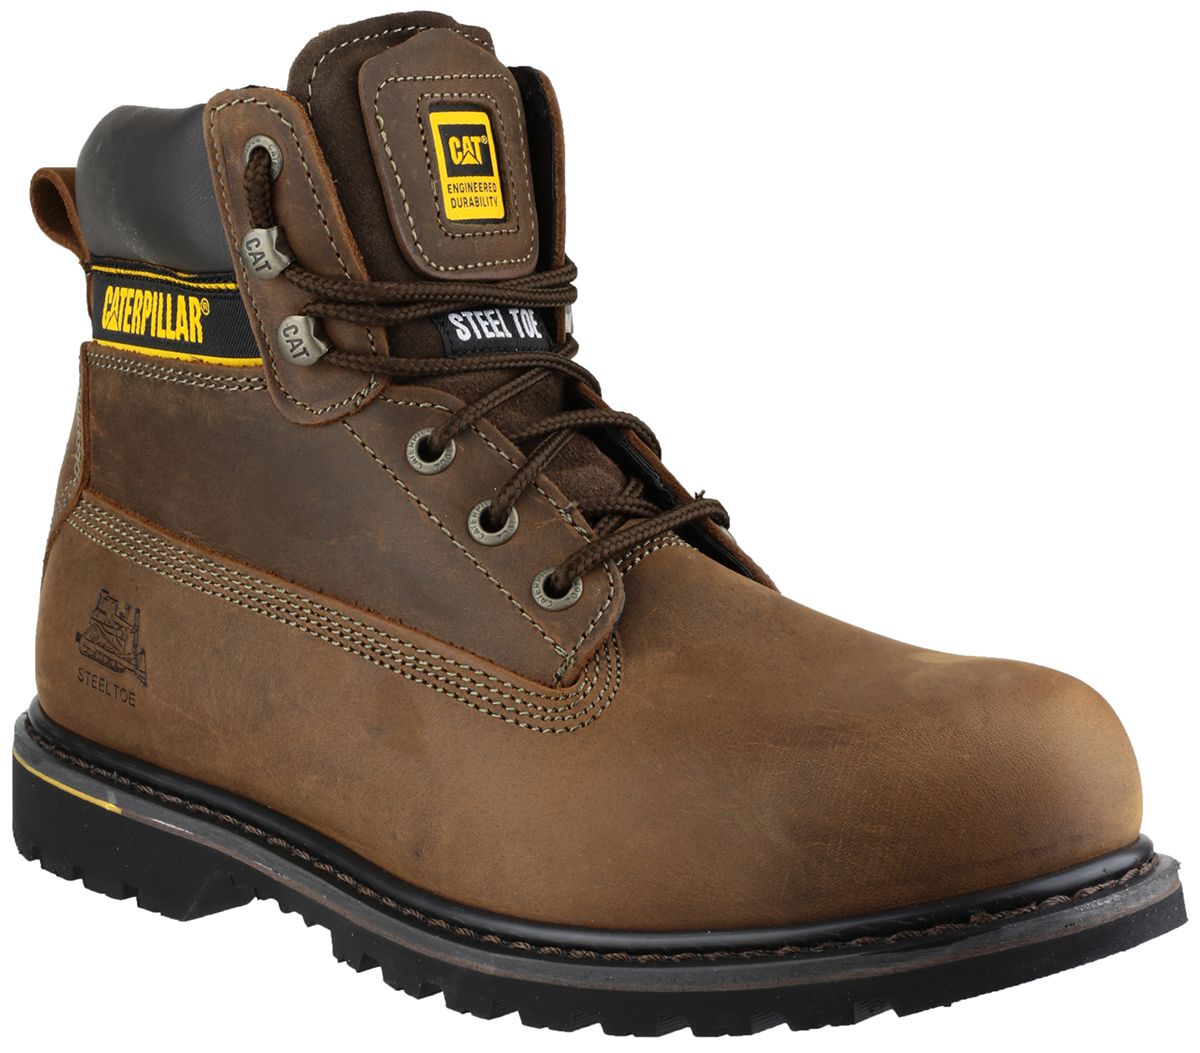 CAT Holton Brown Steel Toe Capped Mens Safety Boots, UK 9, EU 43